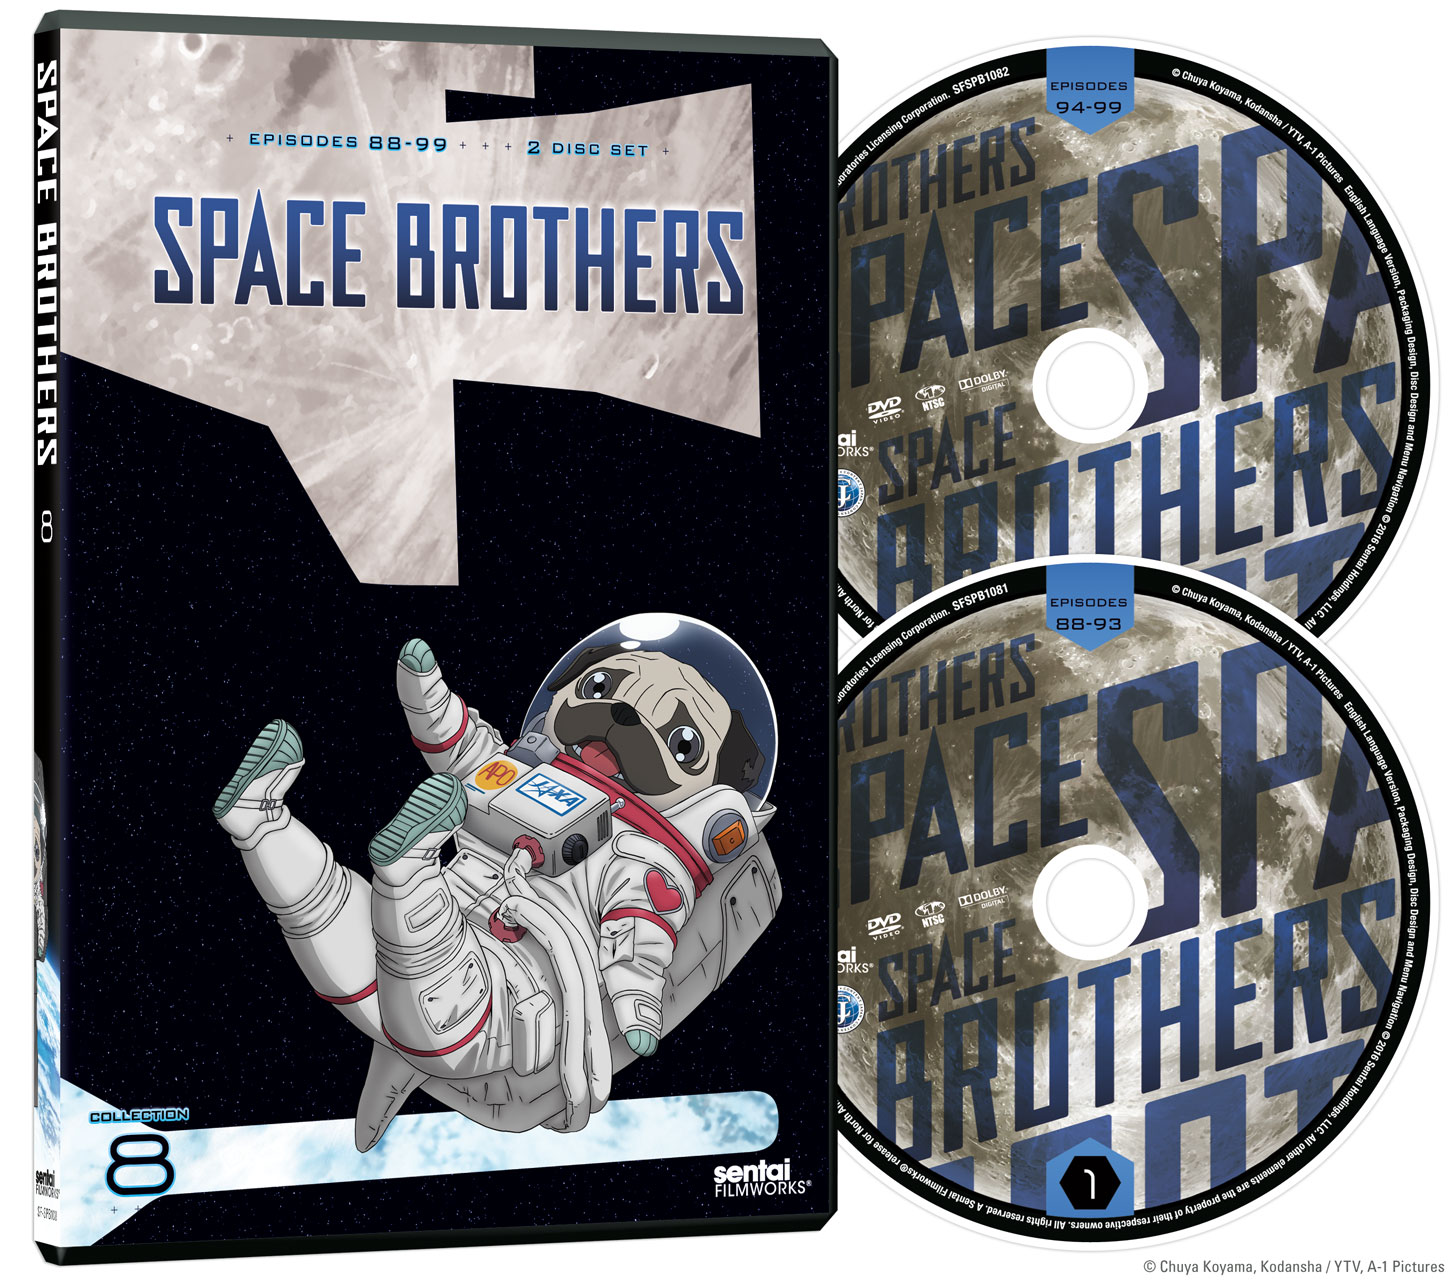 Space Brothers Collection 8 DVD | Crunchyroll Store